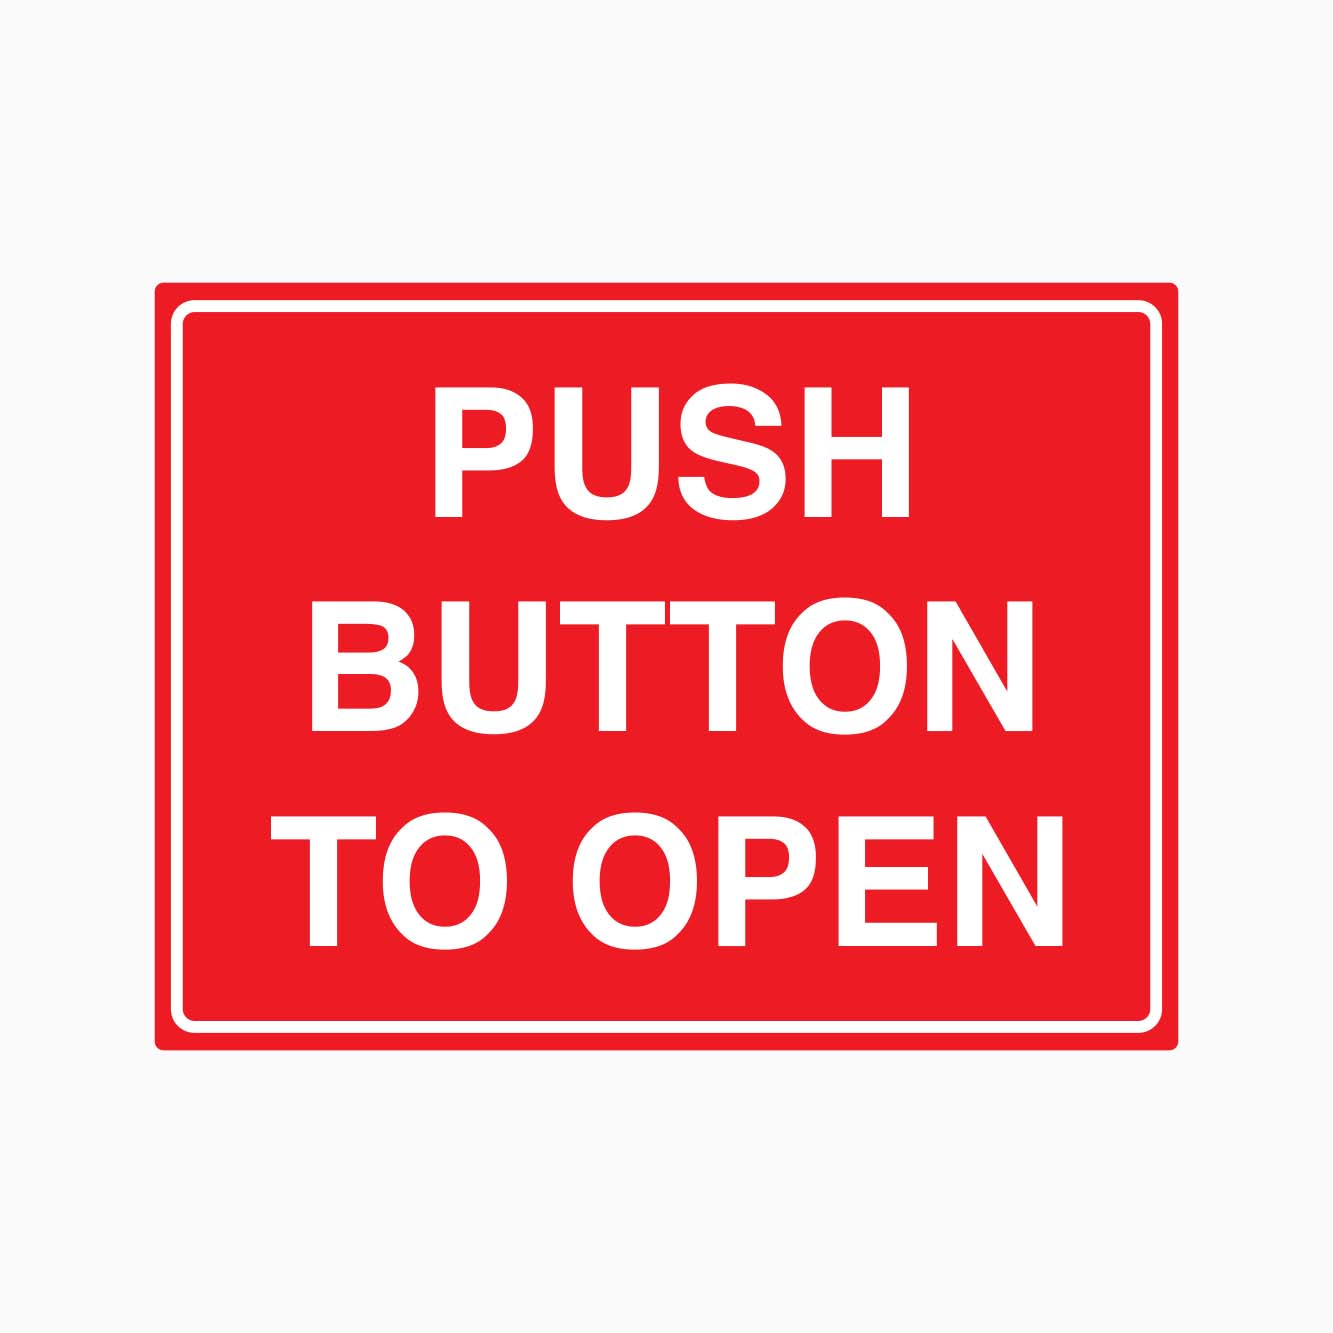 PUSH BUTTON TO OPEN SIGN - GET SIGNS